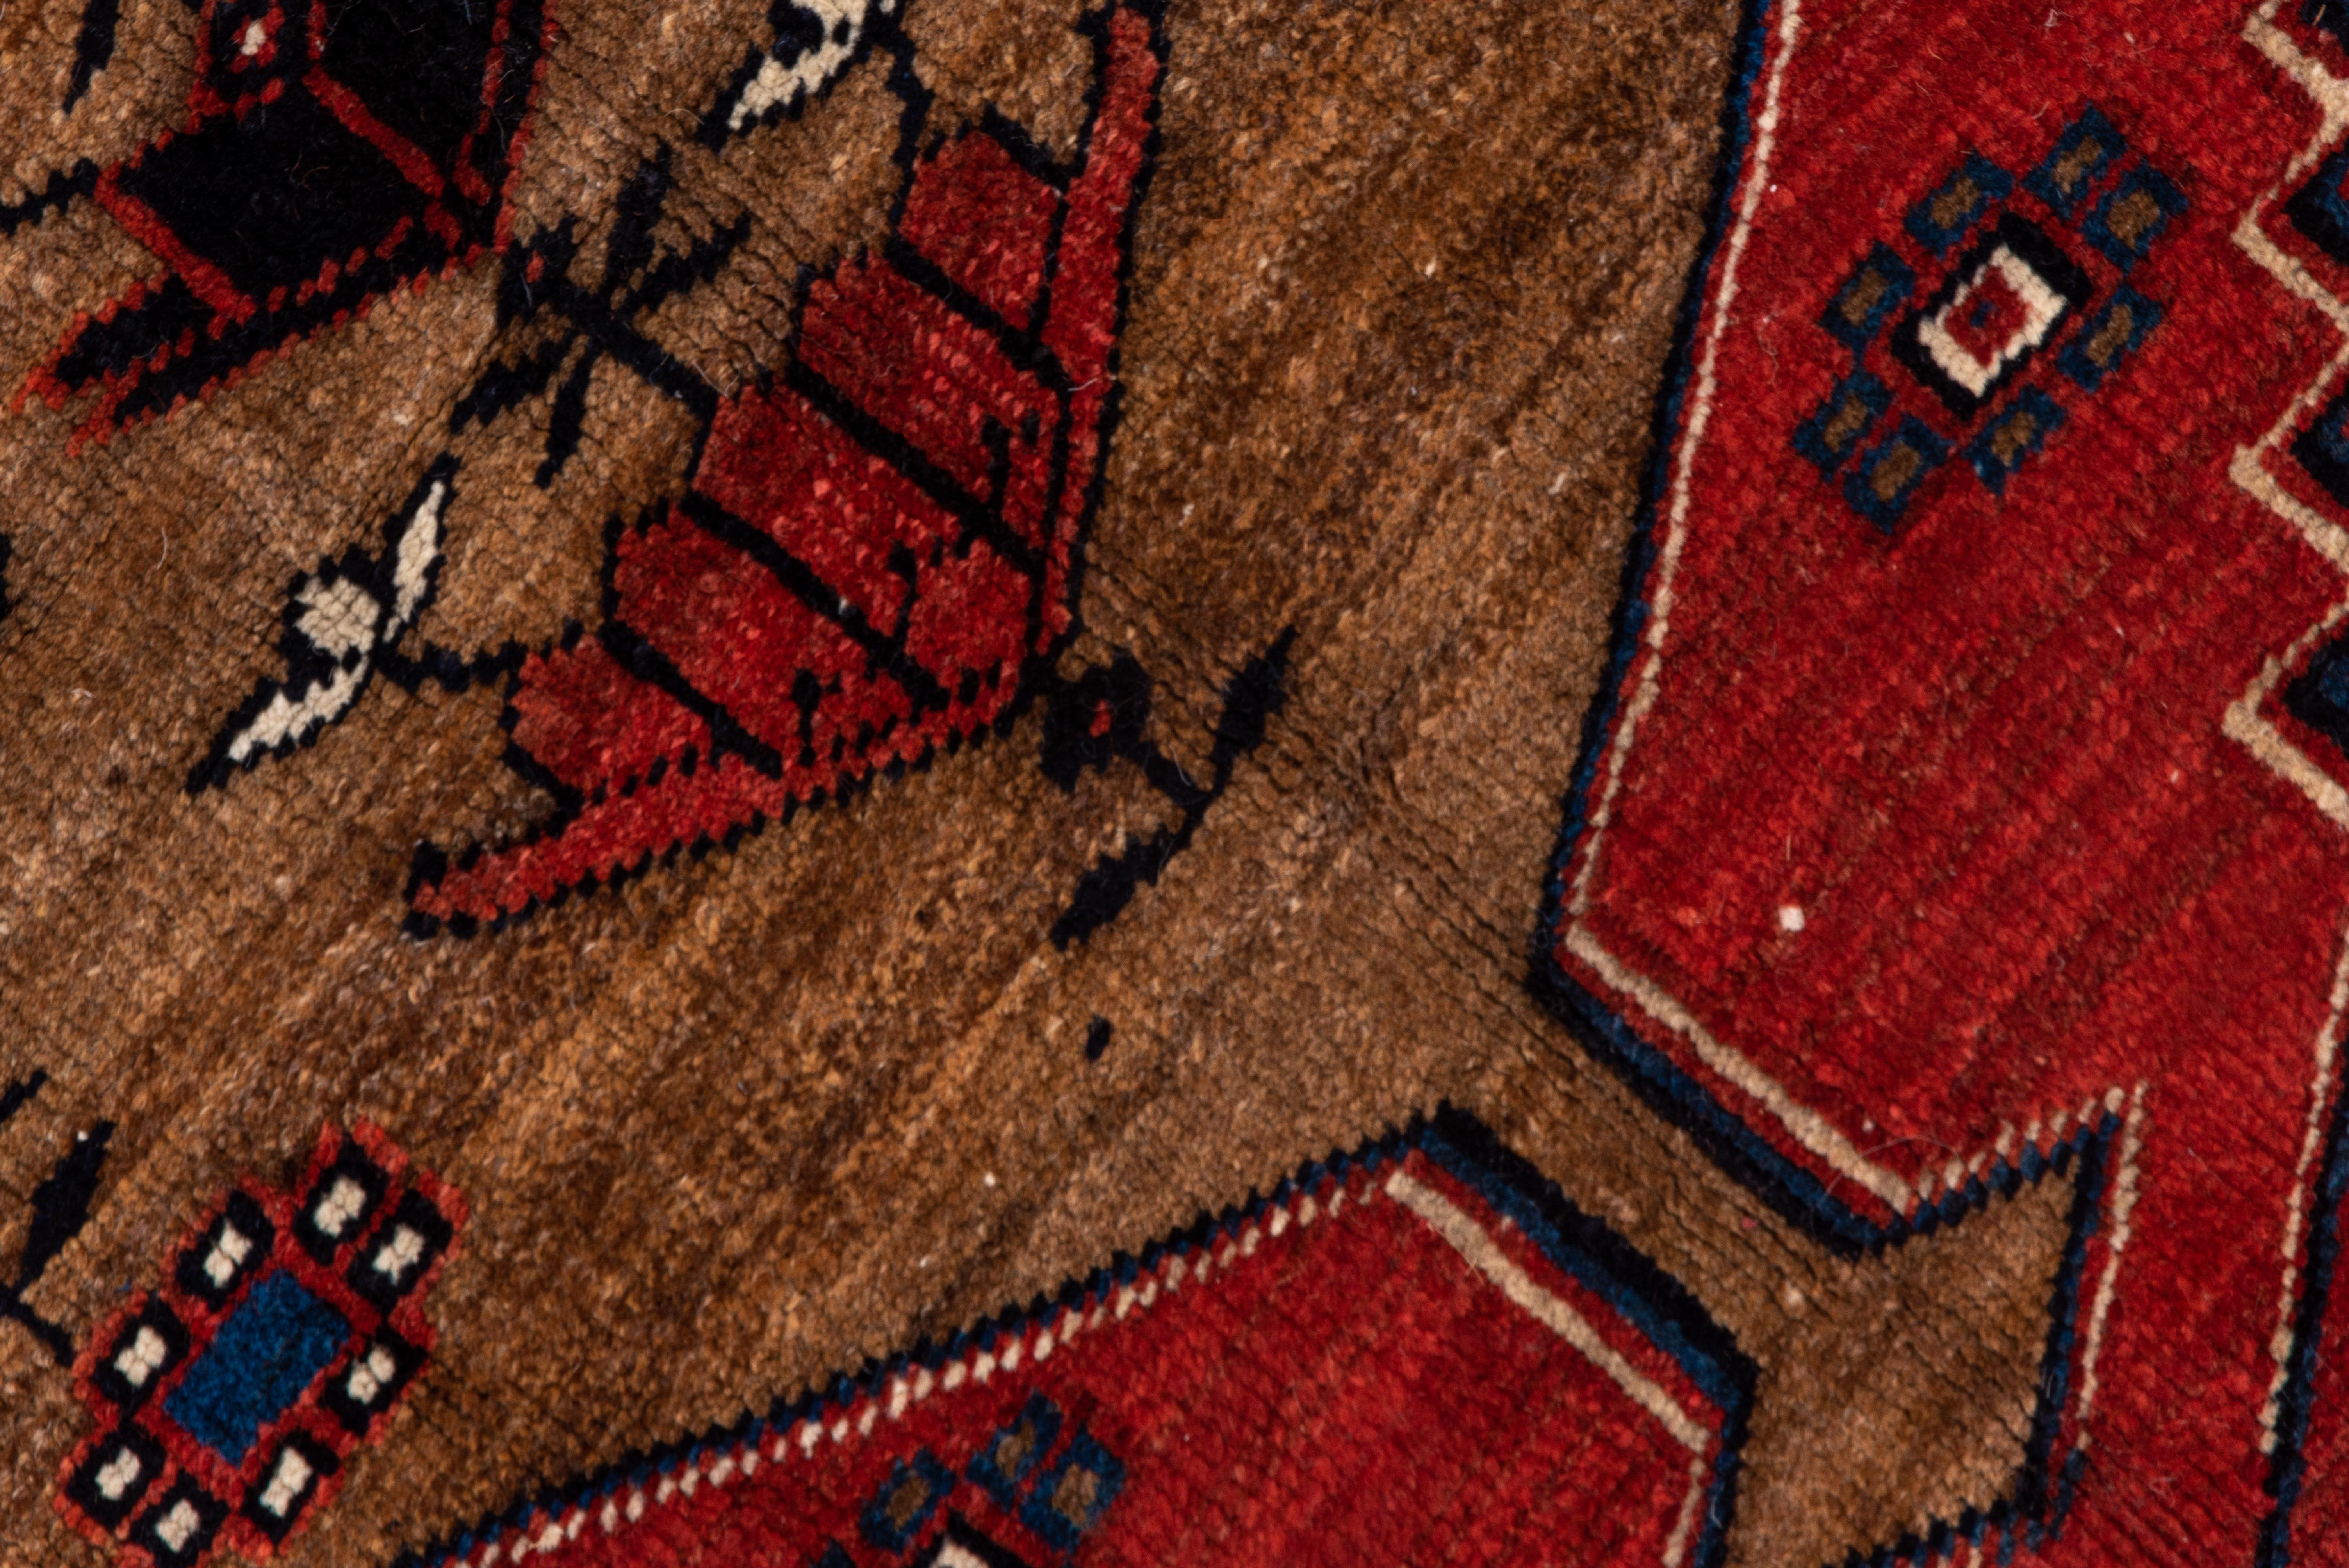 A sun face on the comb fringed central palmette is among the charming naive details on this nicely abrashed tan-camel tone NW Persian carpet. Other amusing elements include tribal animals and two human figures, presumably the weavers, and a